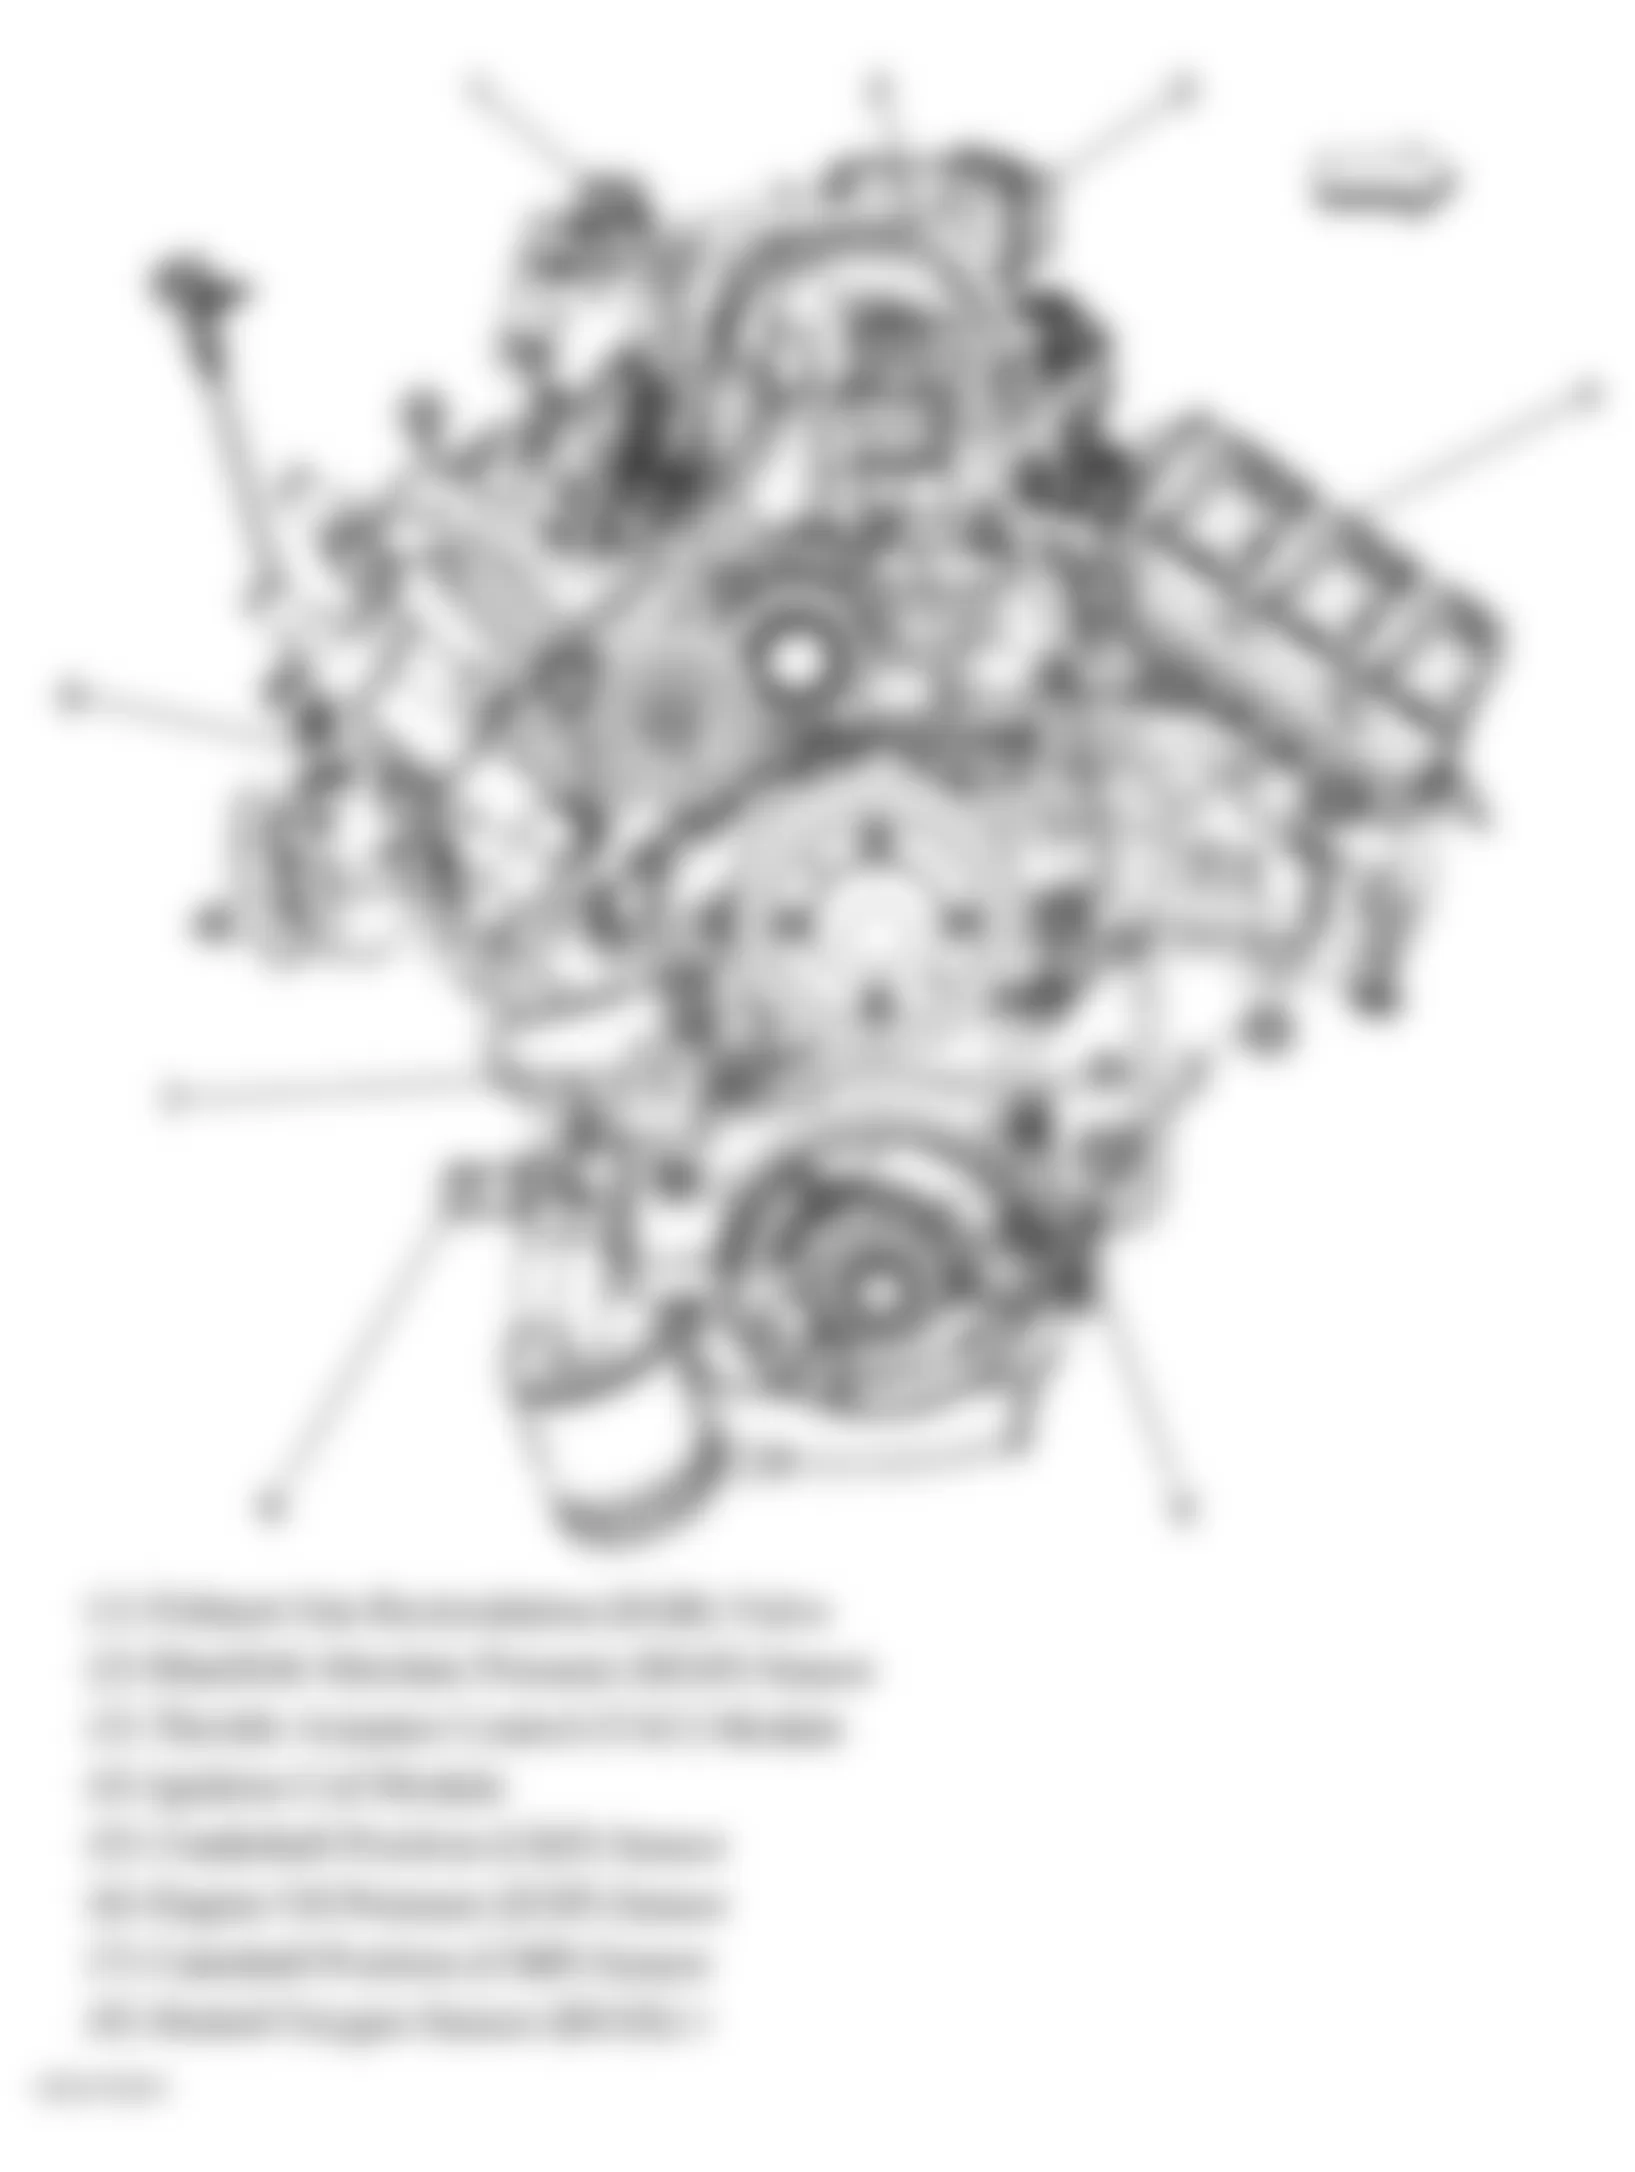 Buick Lucerne CX 2006 - Component Locations -  Front Of Engine (3.8L)